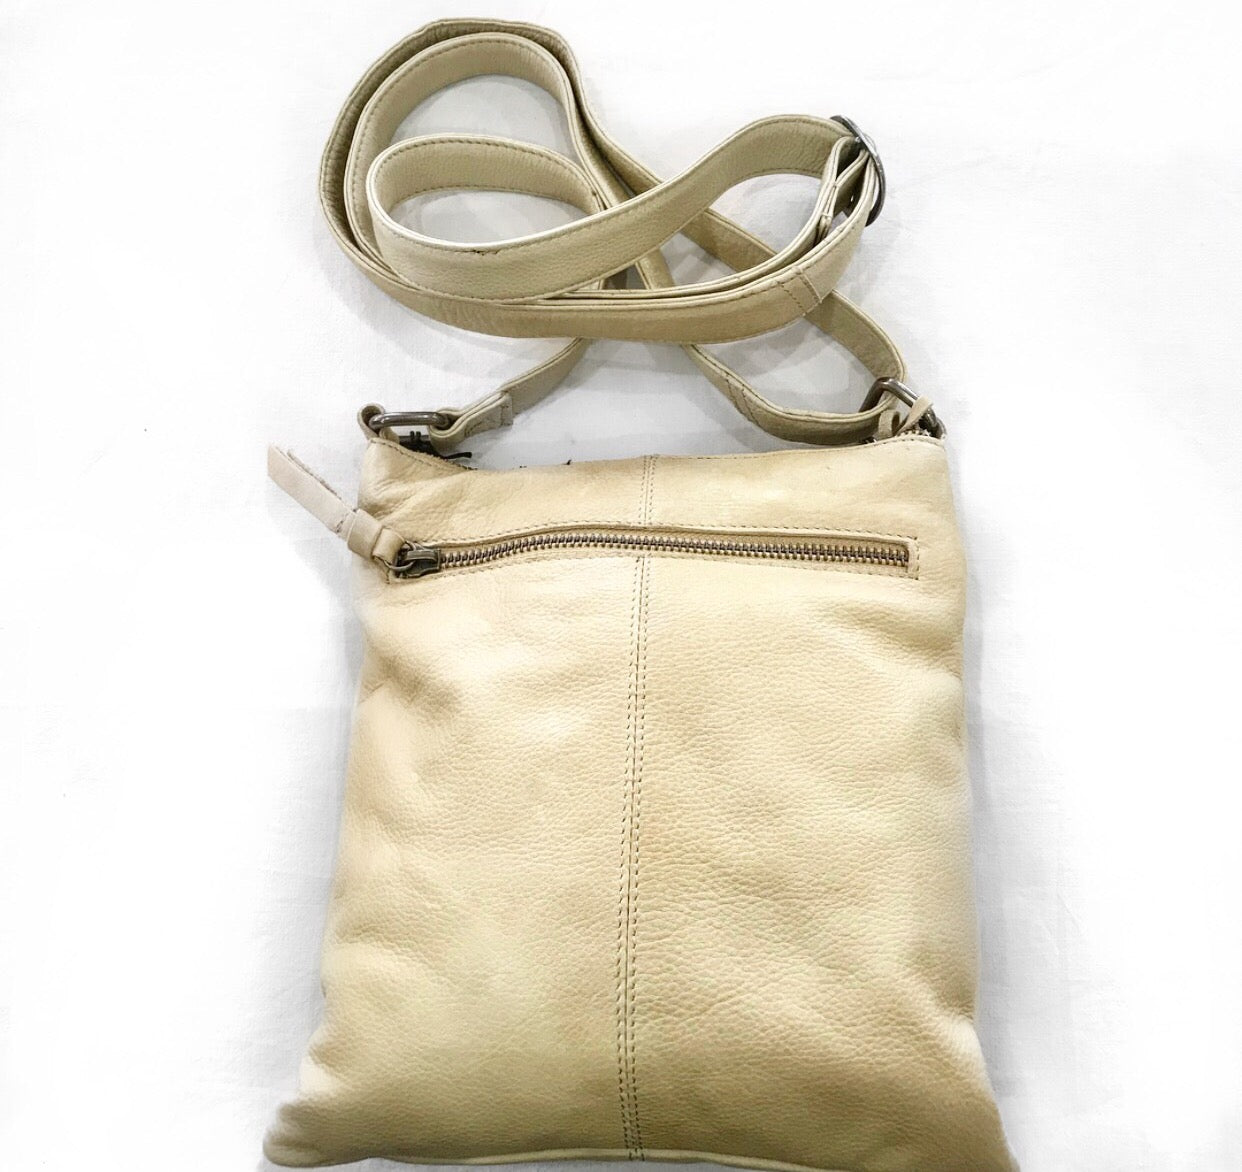 Oran By Rugged Hide Audrina Leather Crossbody [COLOUR:Dusty sand]